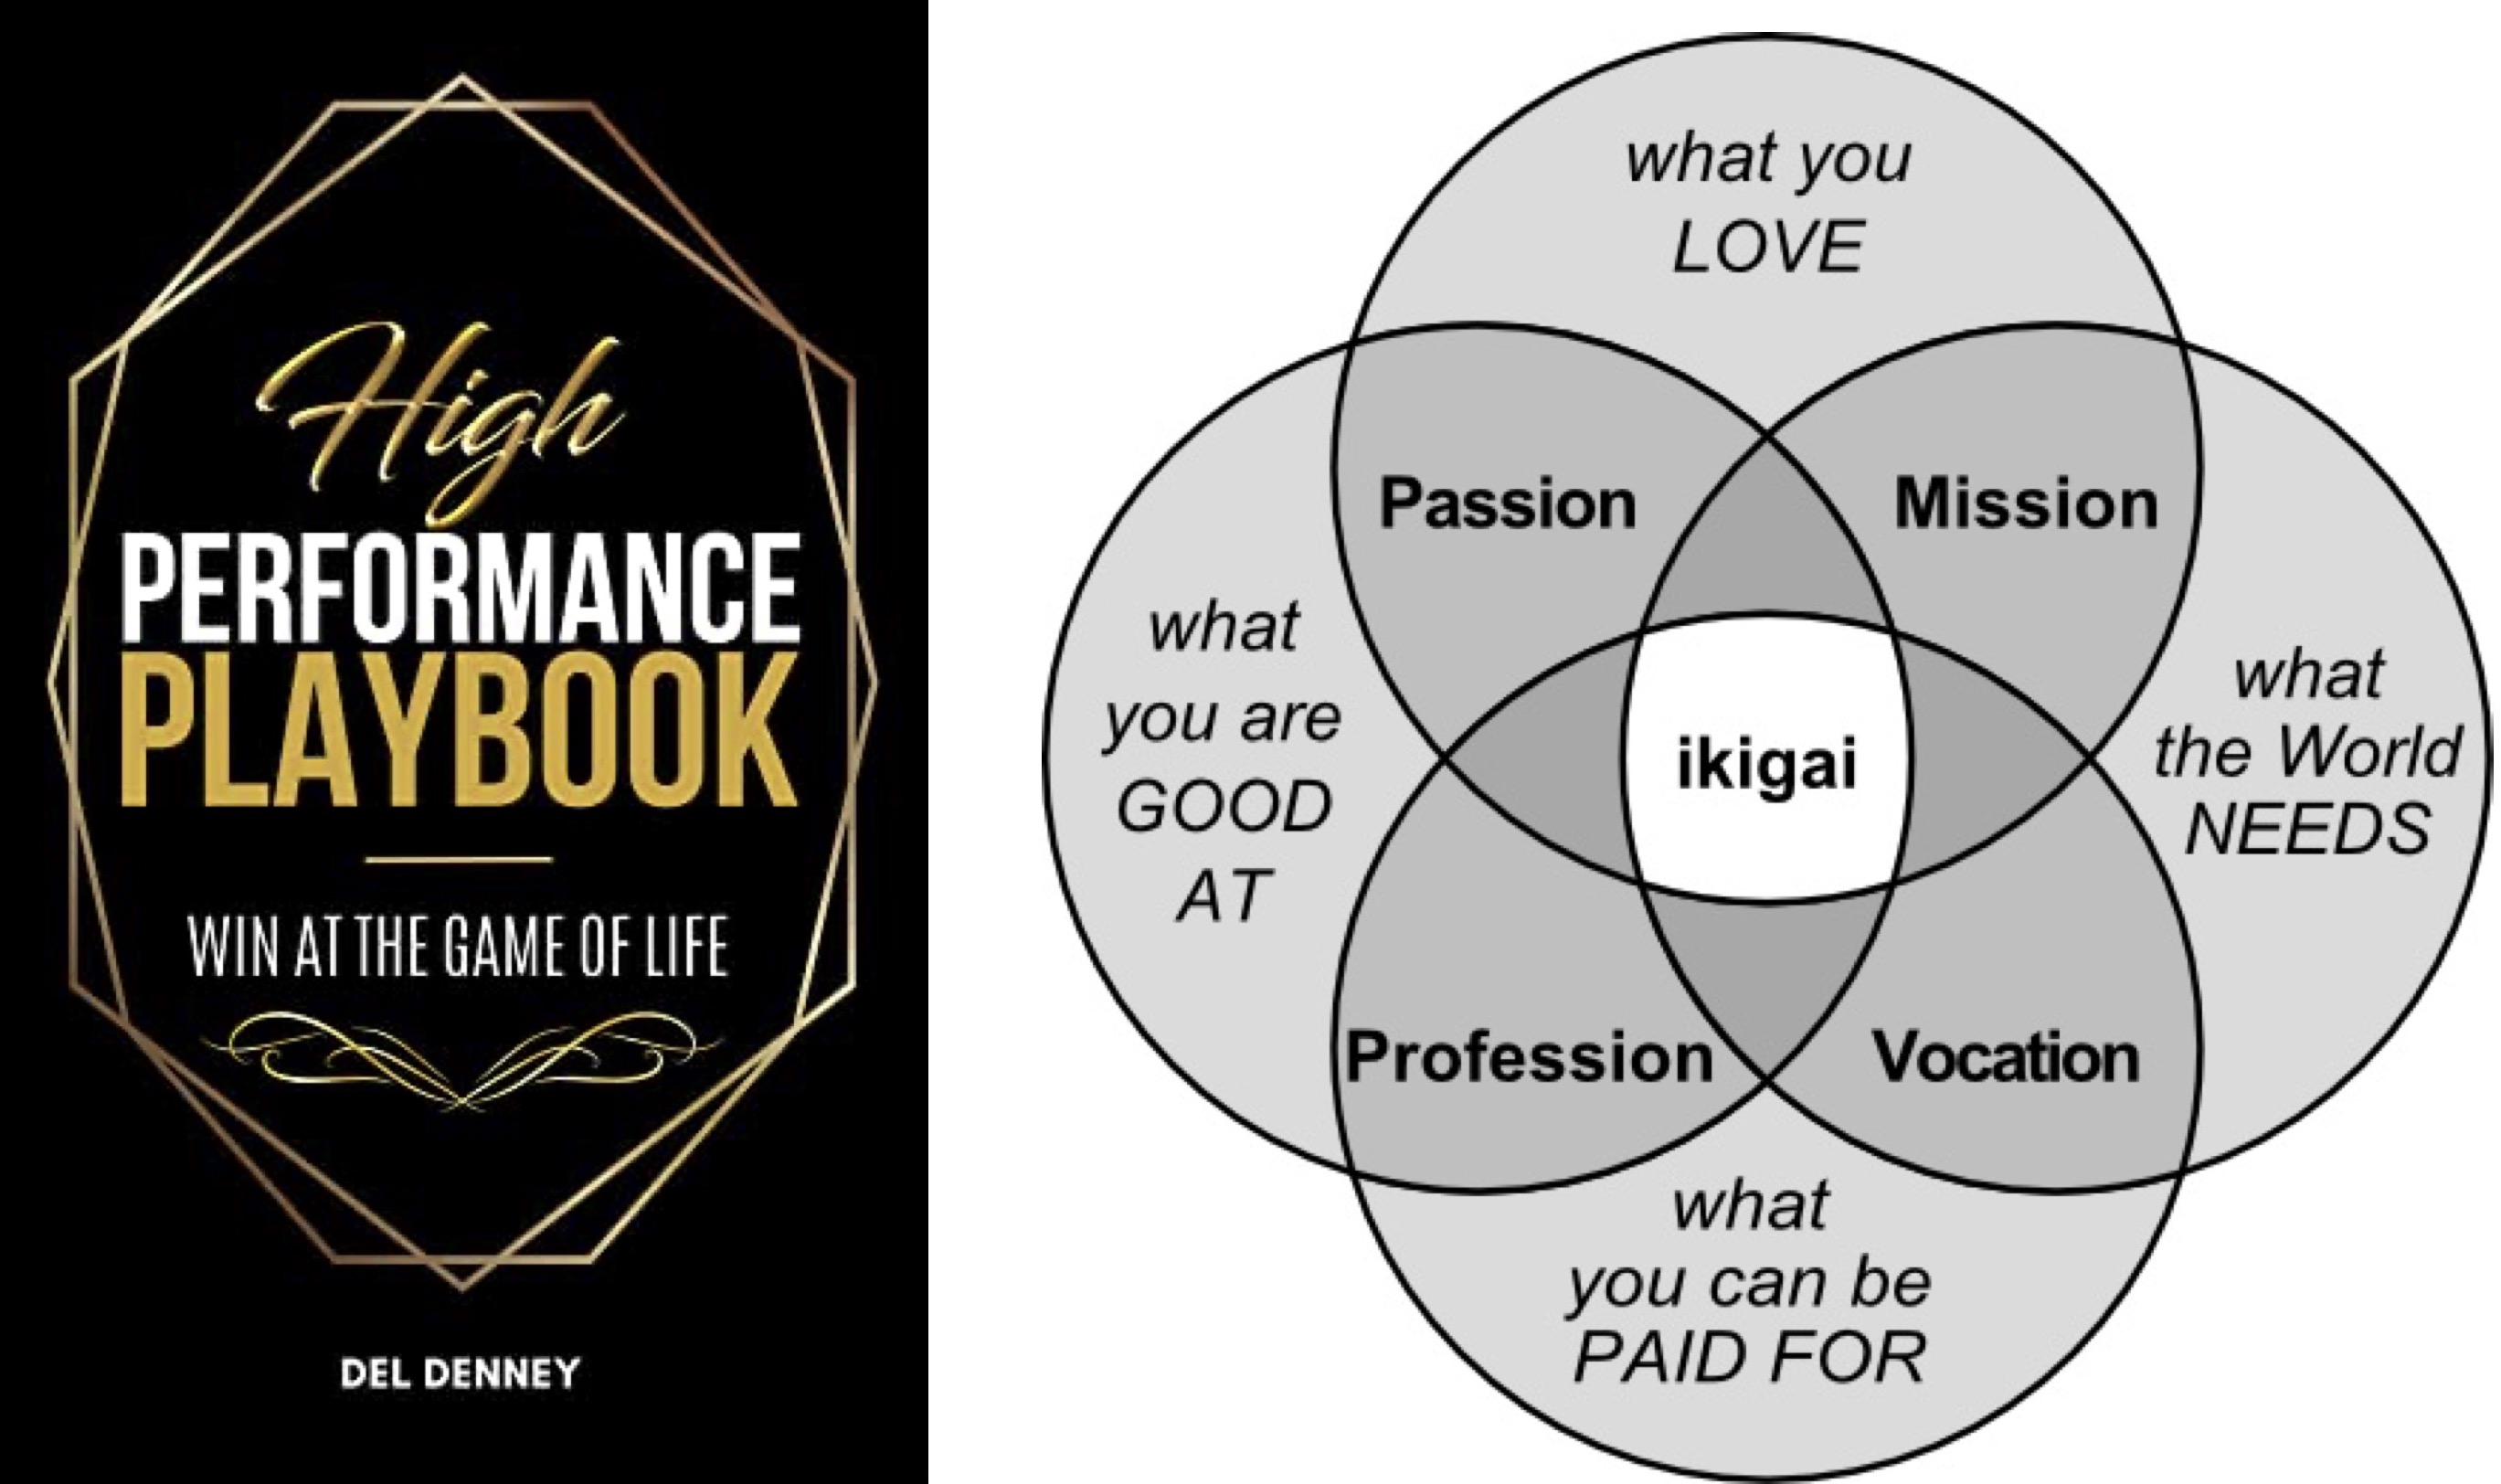 Ikigai and the High Performance Playbook by Del Denney